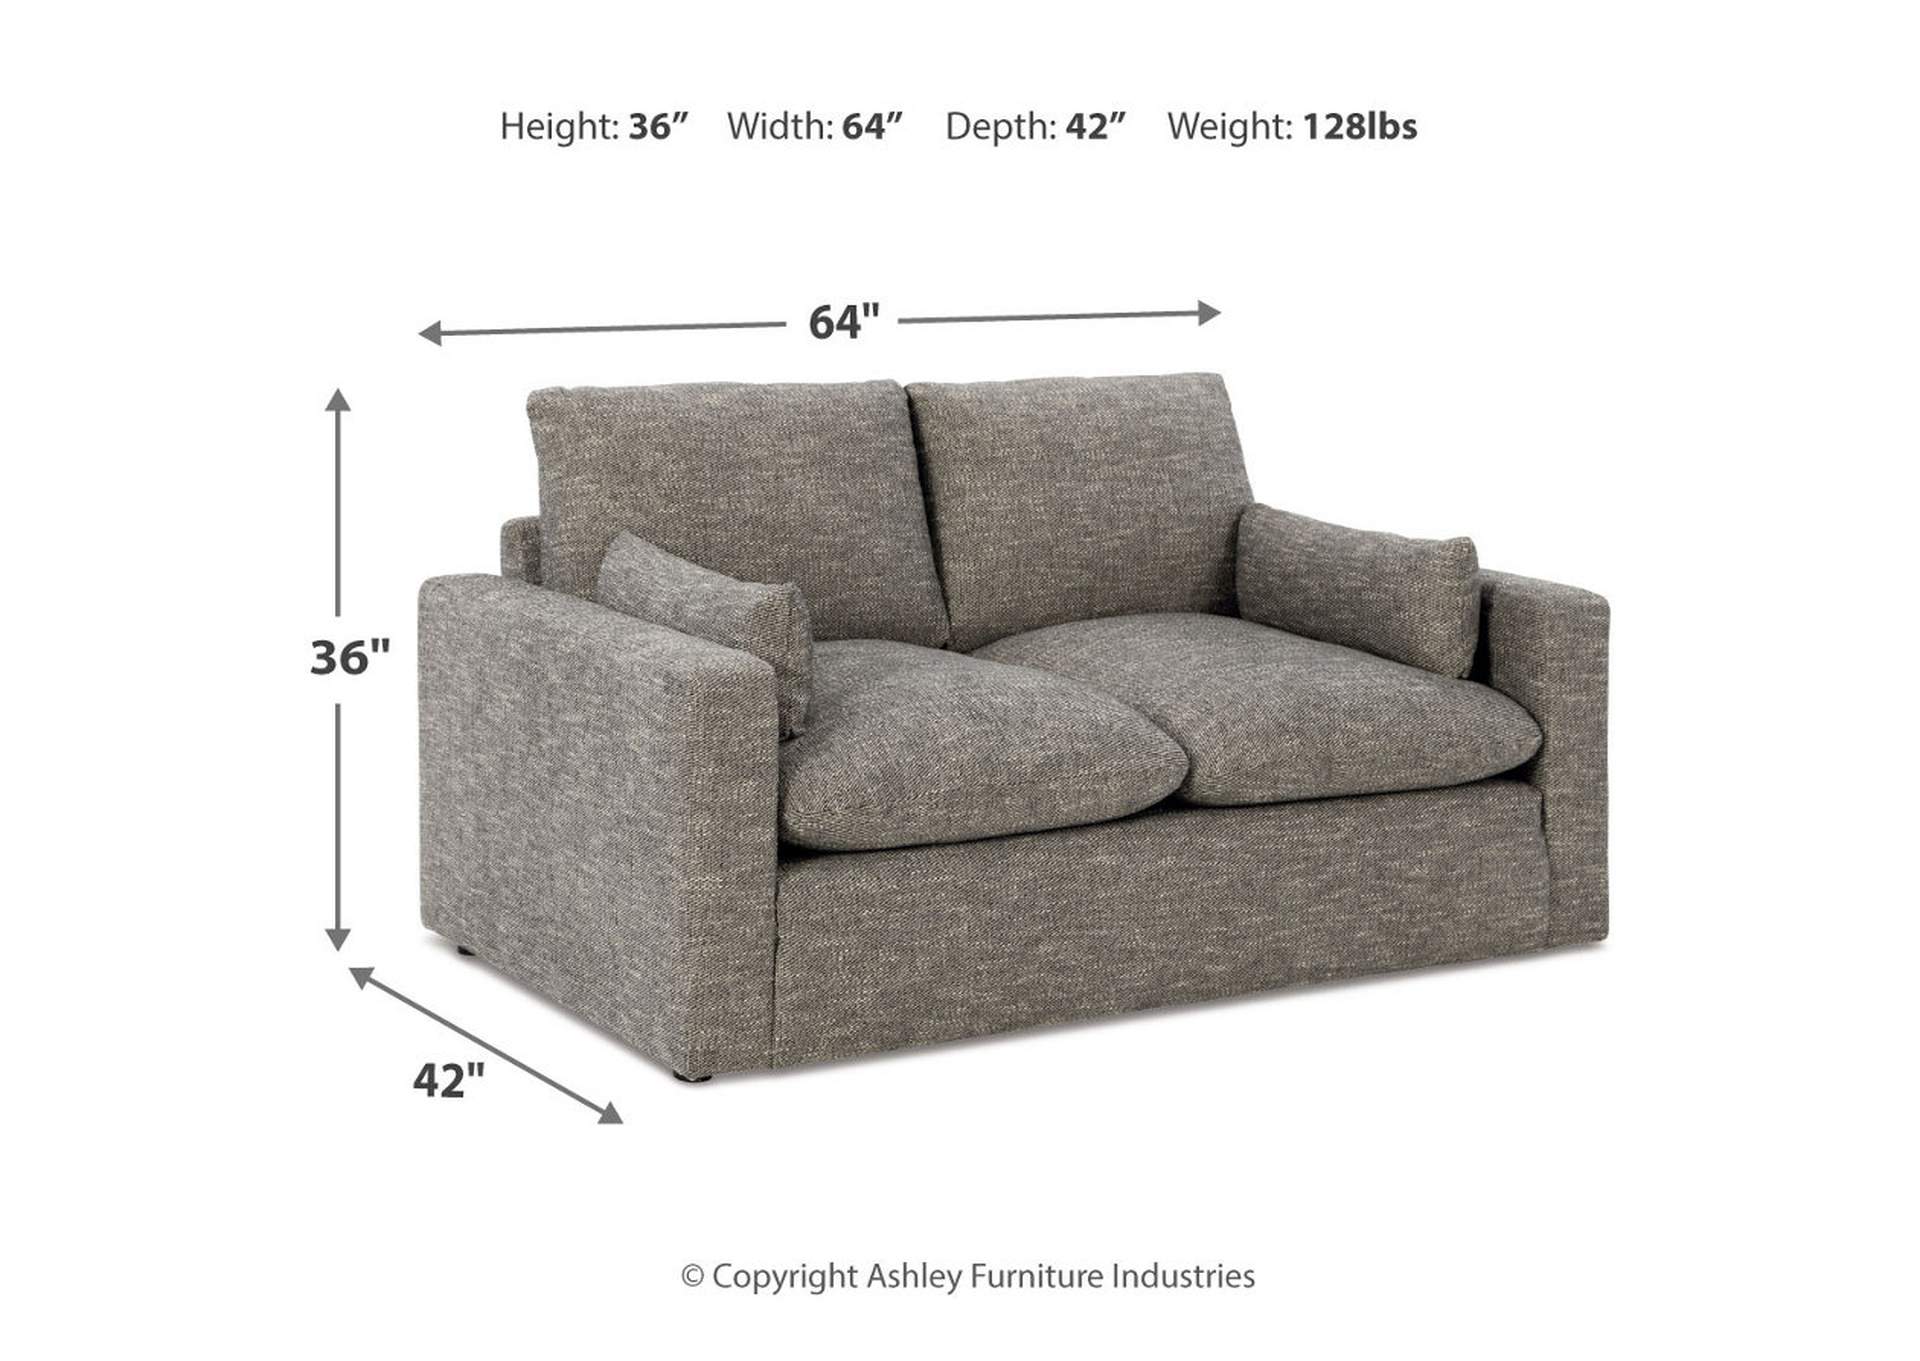 Dramatic Sofa, Loveseat, Chair and Ottoman,Benchcraft